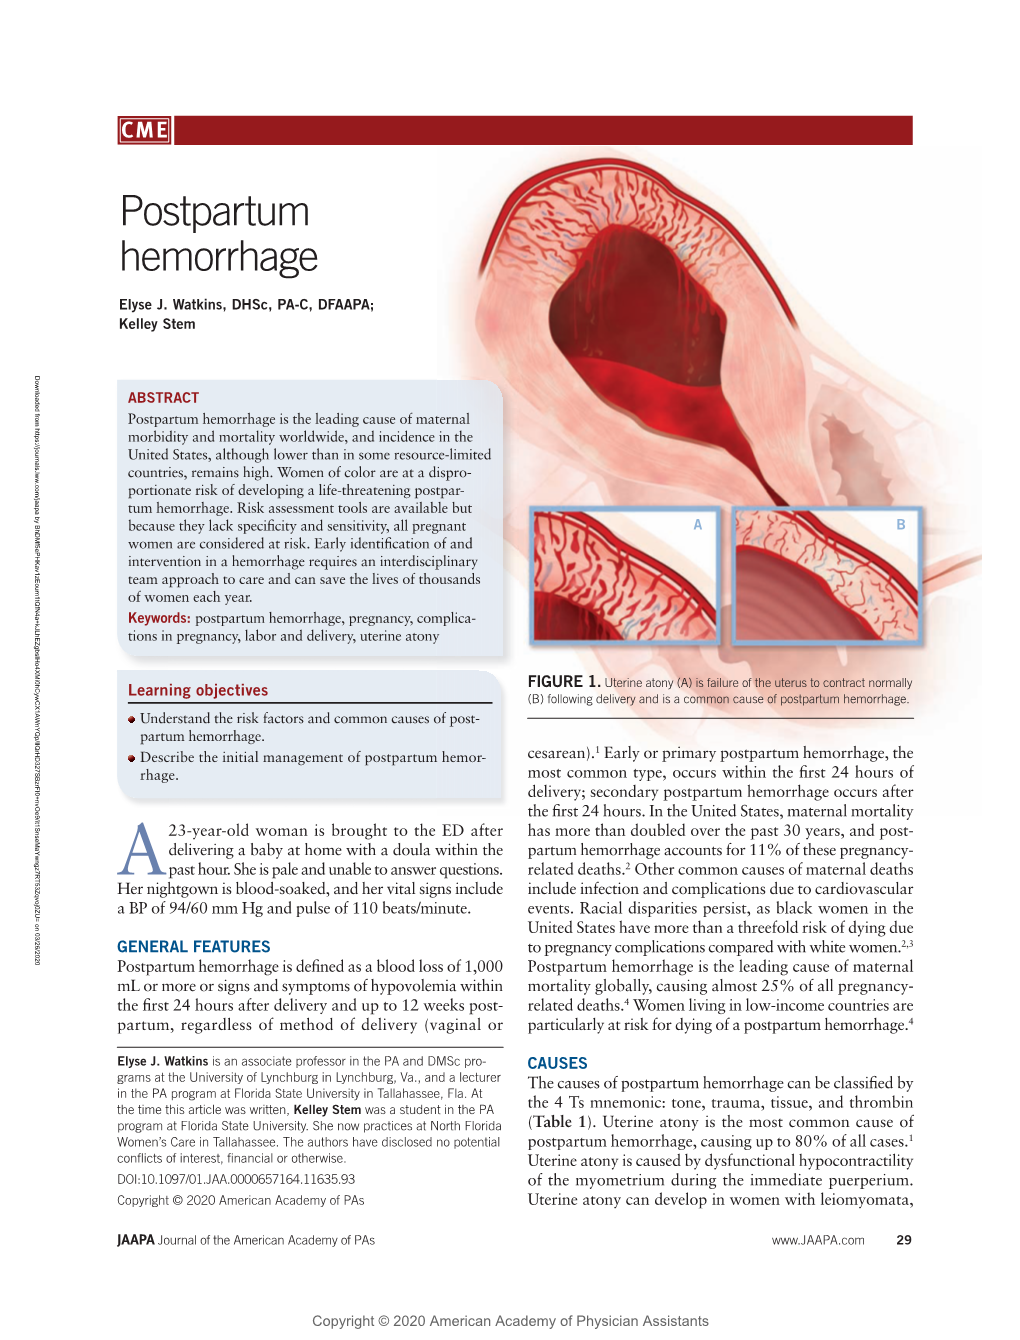 Postpartum Hemorrhage, the Early Or Primary Postpartum Hemorrhage, 1 Physician of Table 1)